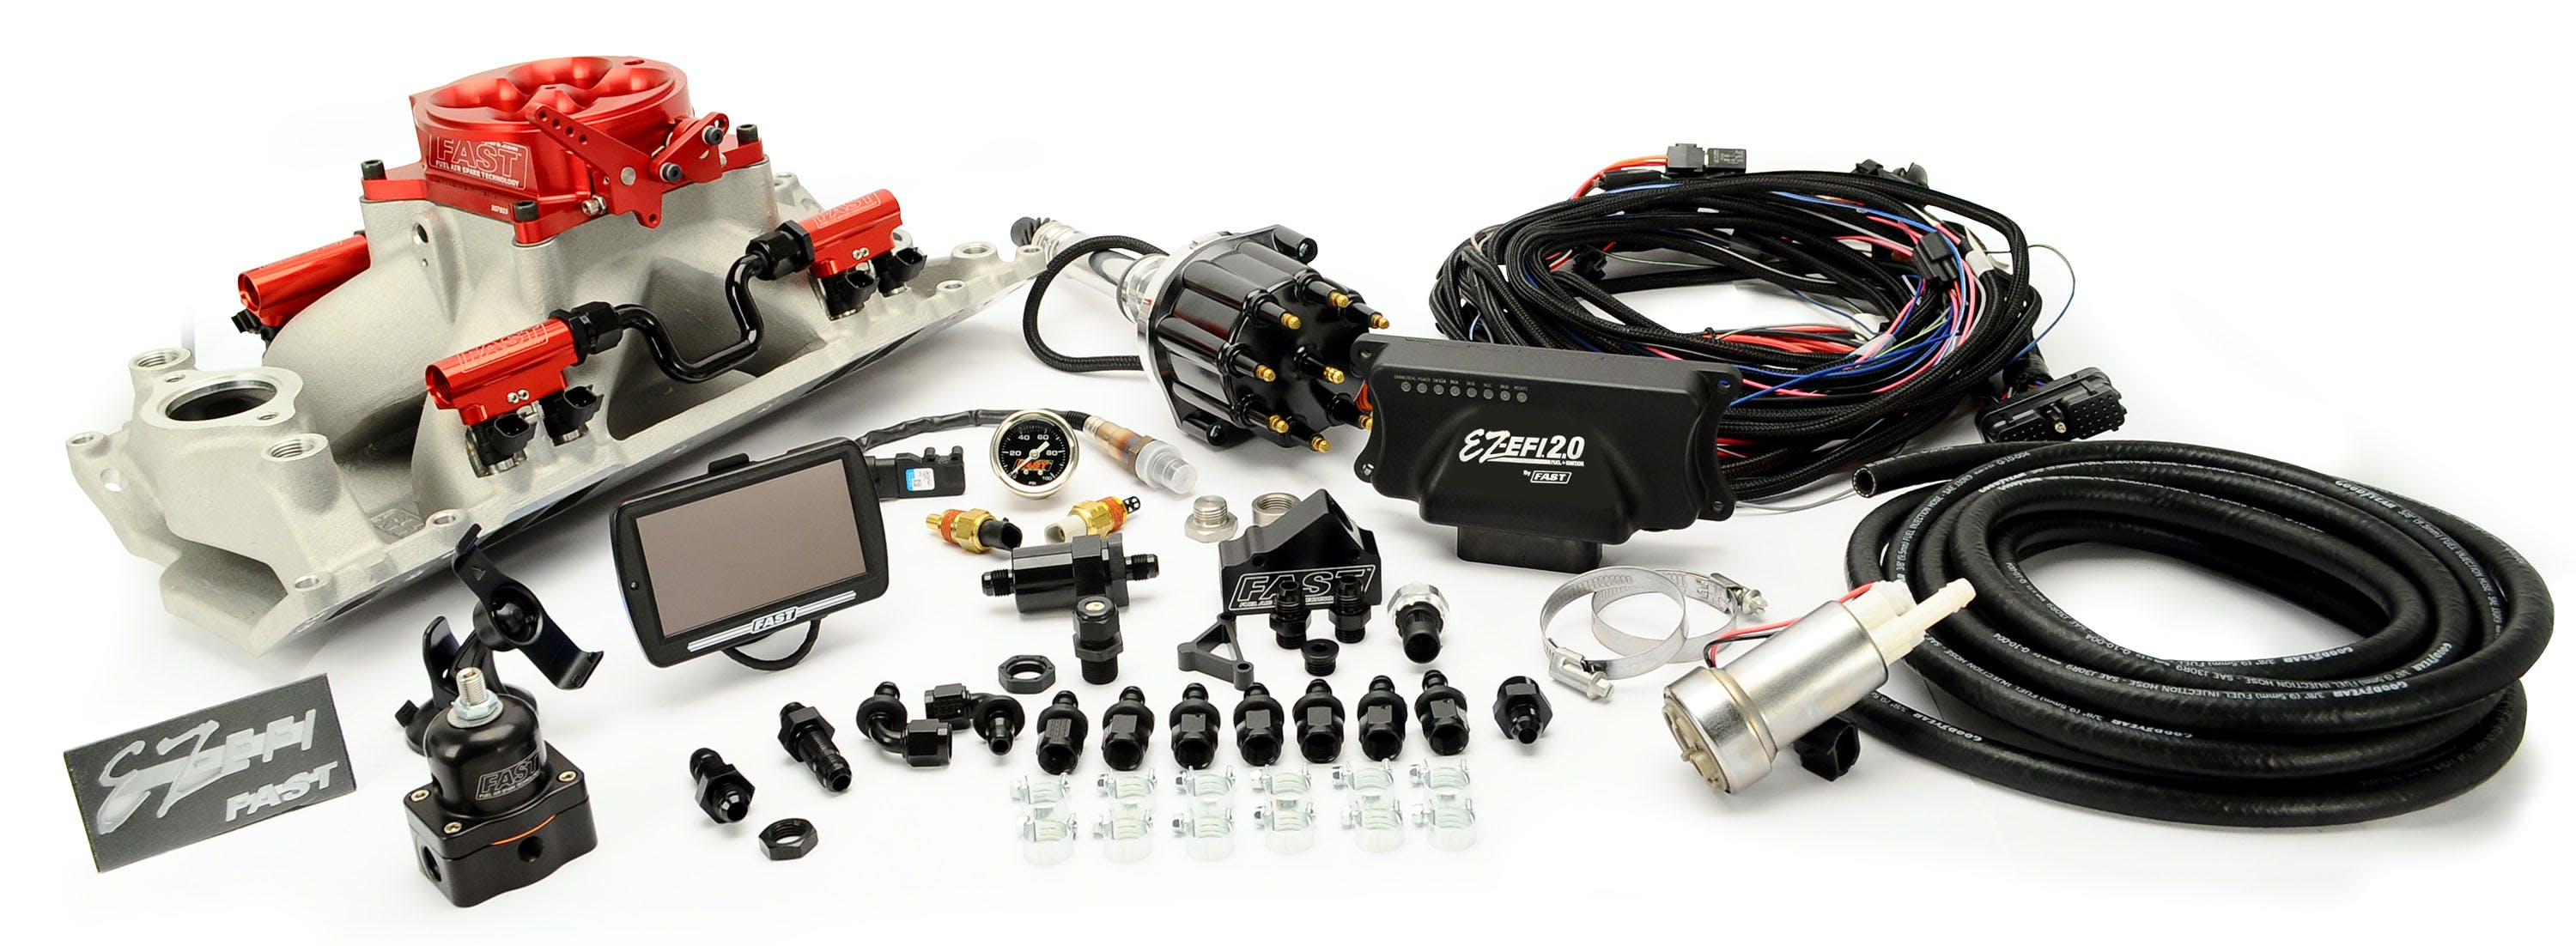 FAST - Fuel Air Spark Technology 30412-05L EZ 2.0 SBC Multiport w/intake, rails, throttle body, distributor and fuel pump